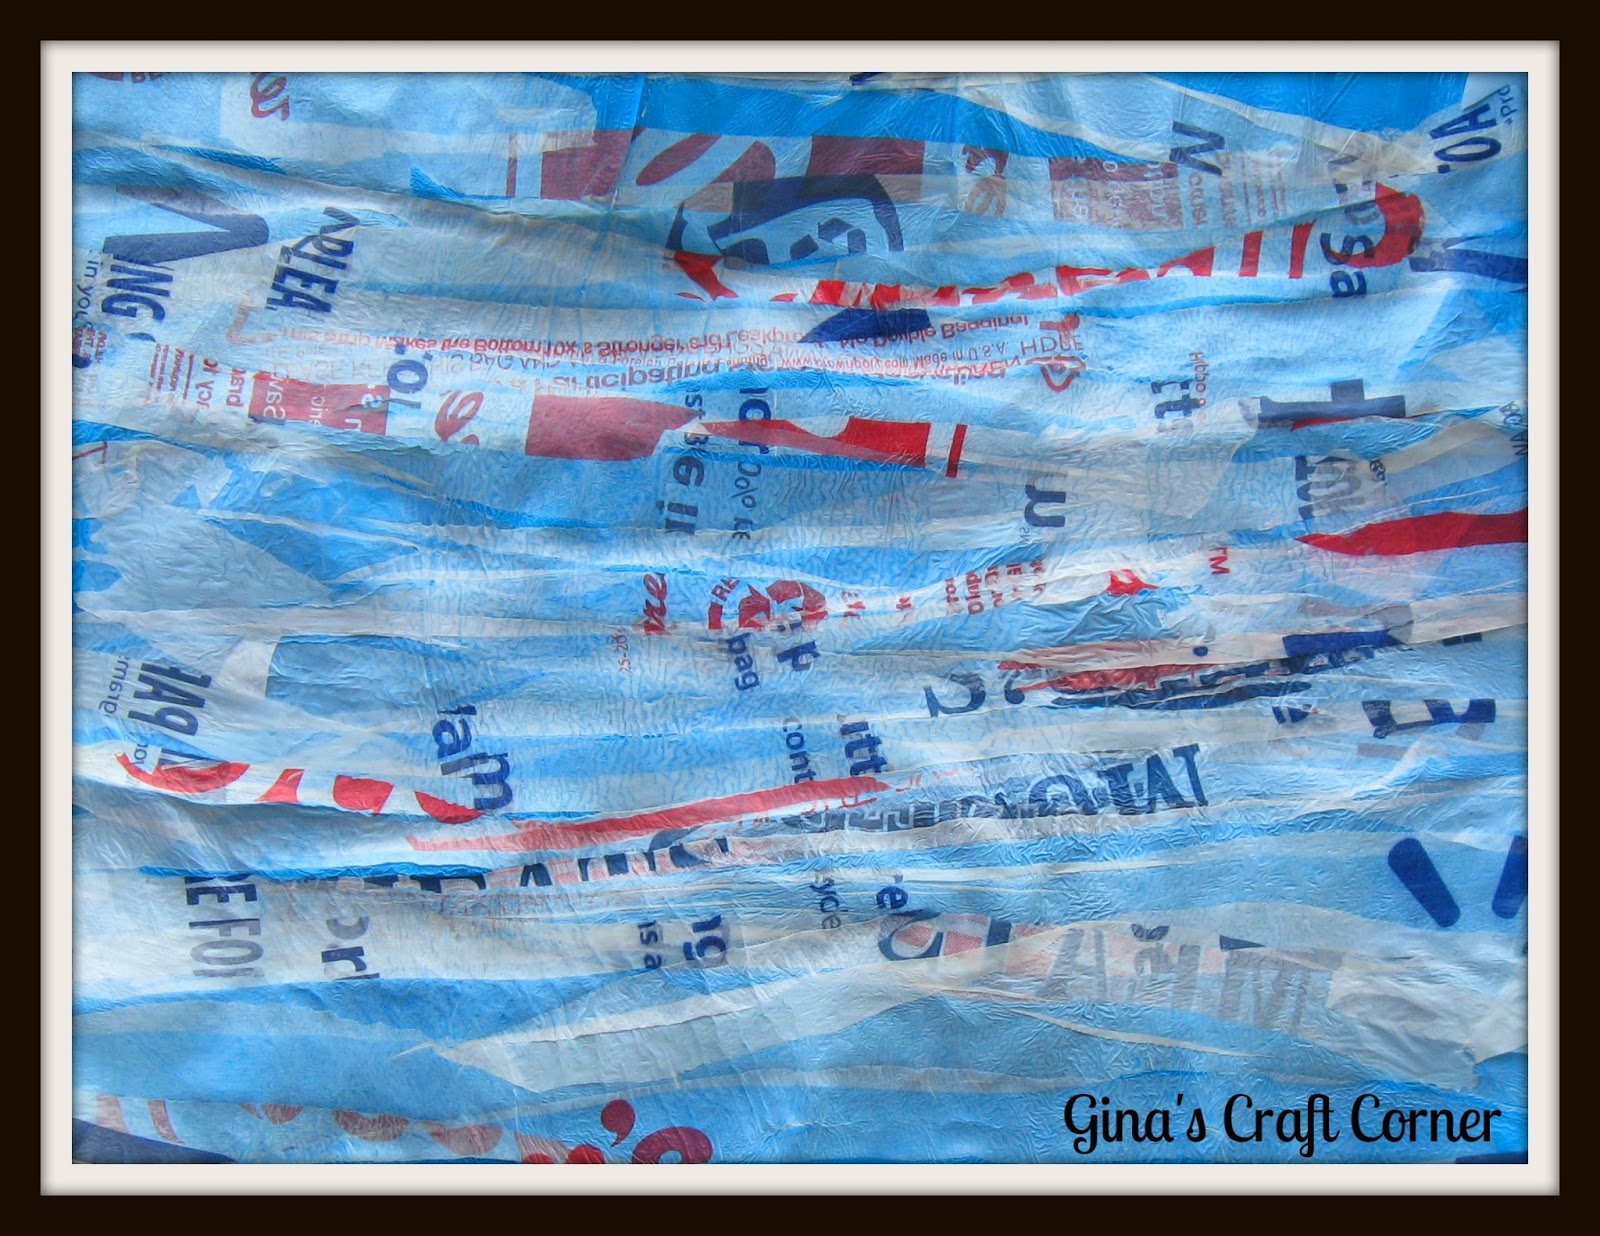 How to Make Fabric From Fused Plastic Bags (Free DIY!) - Craft